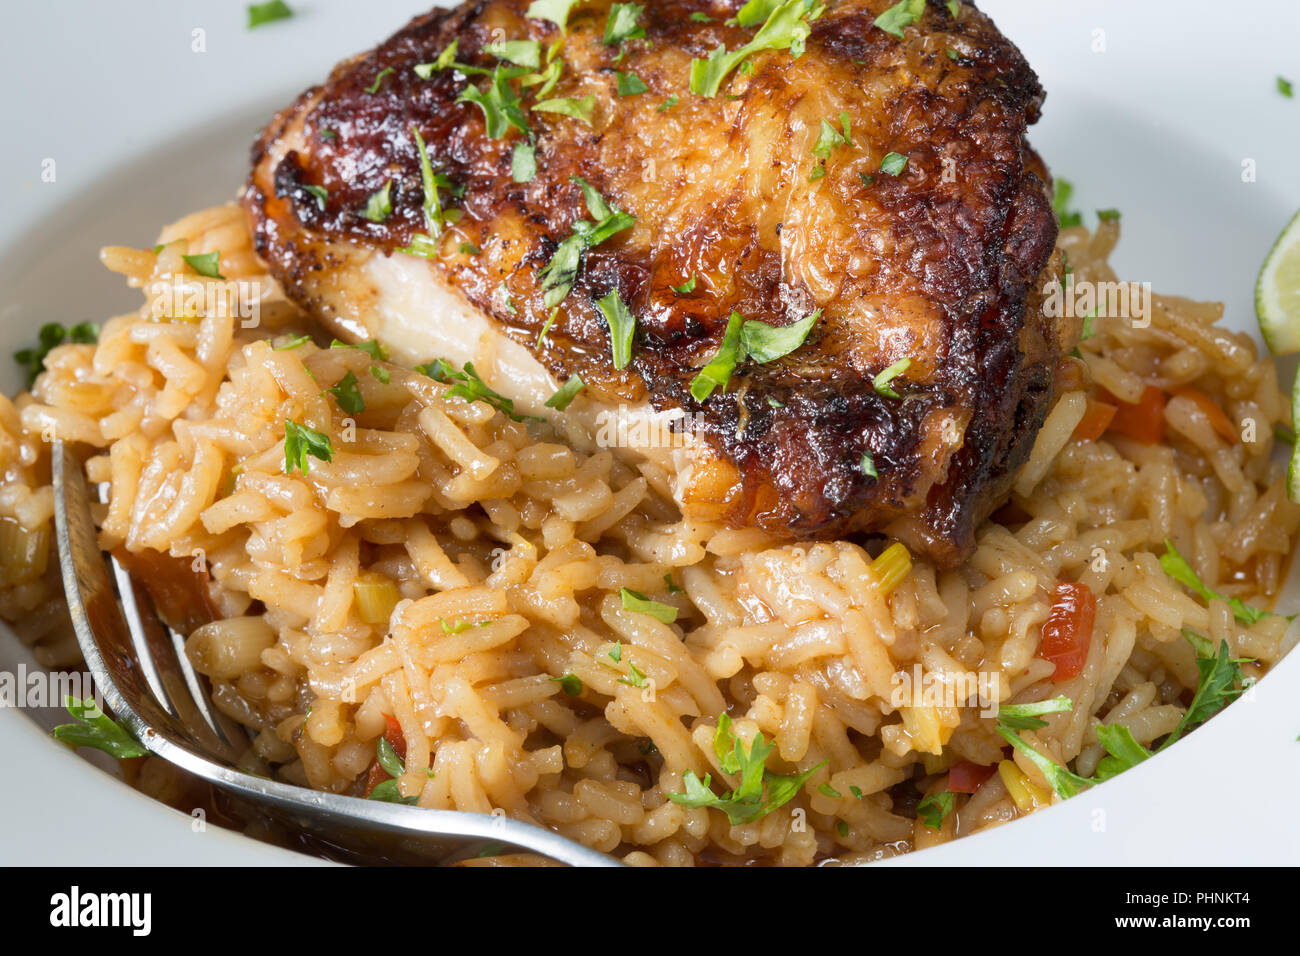 An English pub main course dish of Chili lime Chicken with braised rice. Stock Photo